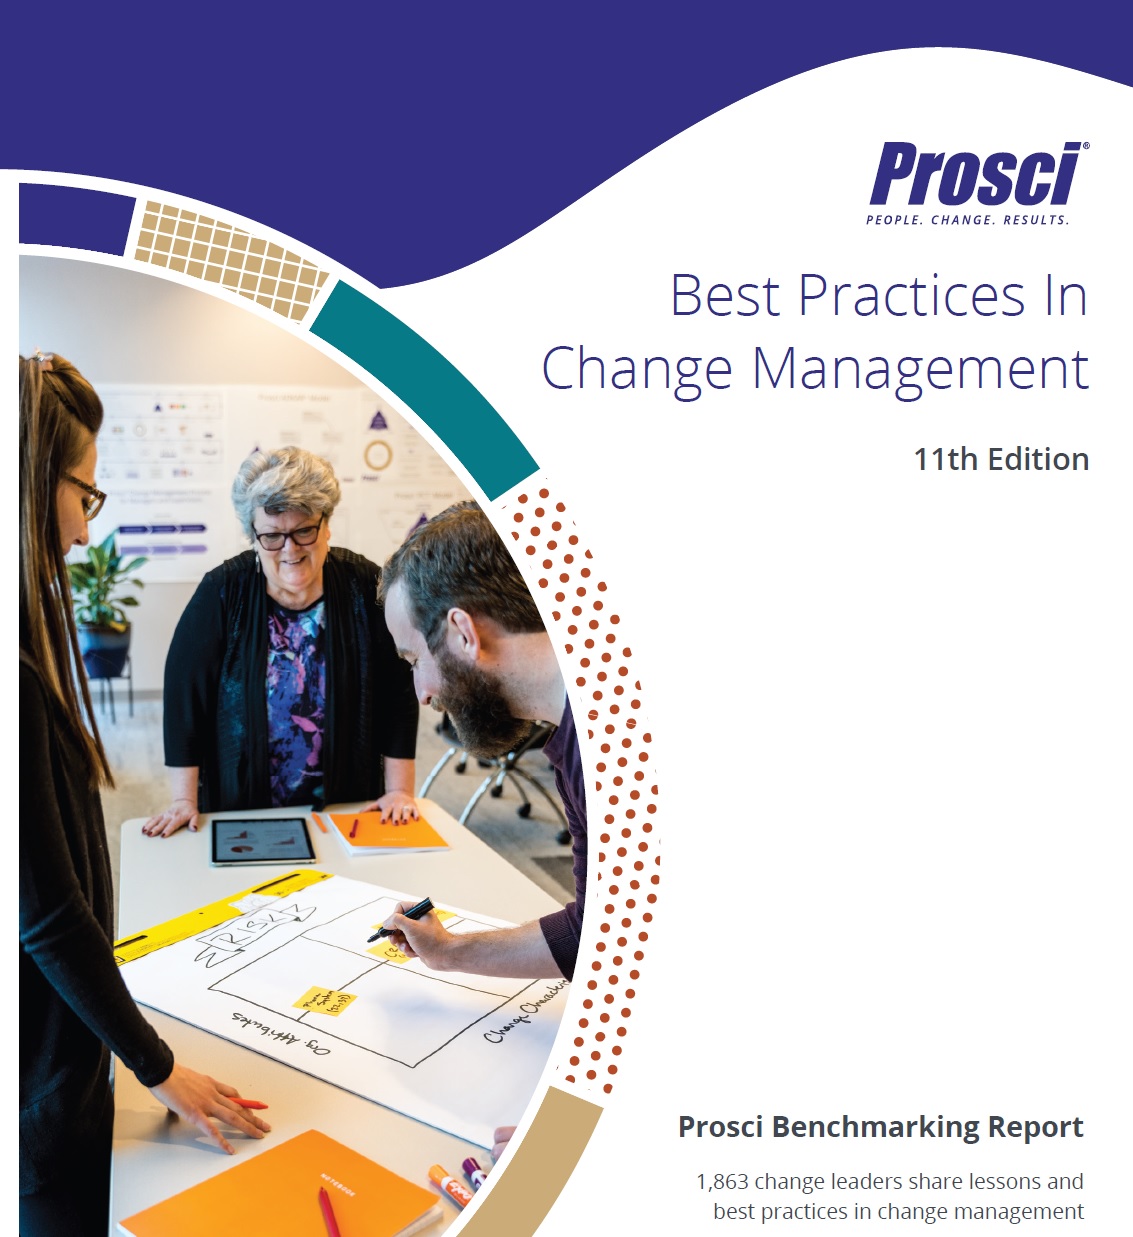 Best Practices in Change Management and Change